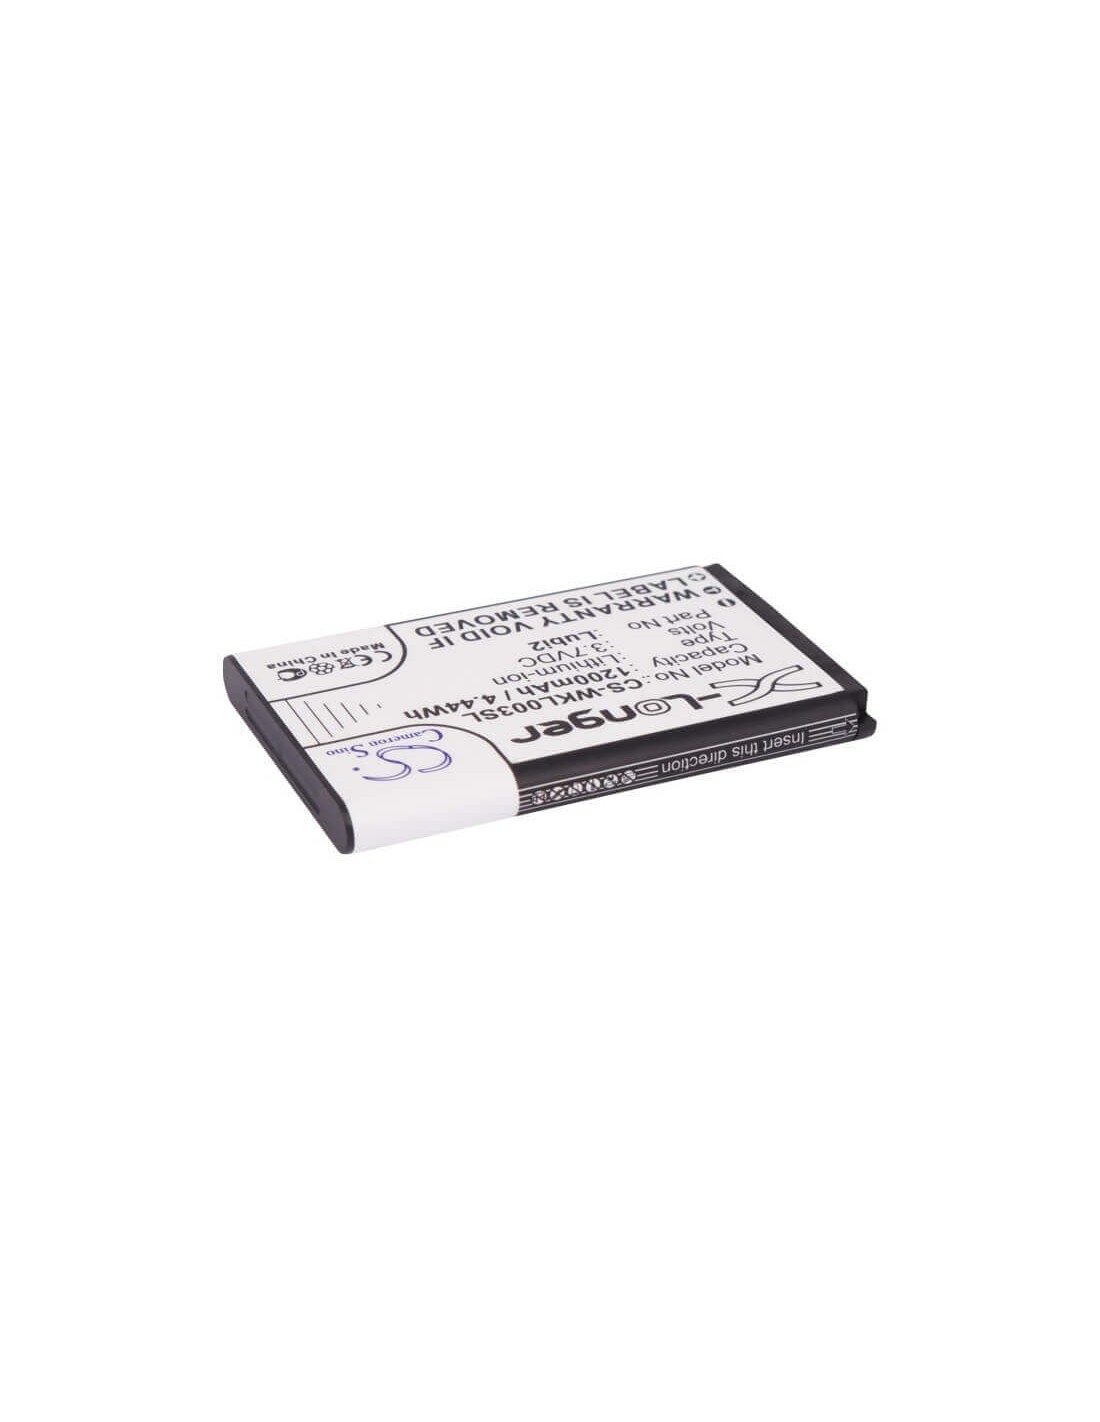 Battery for Aligator A290, A330, A350 3.7V, 1200mAh - 4.44Wh